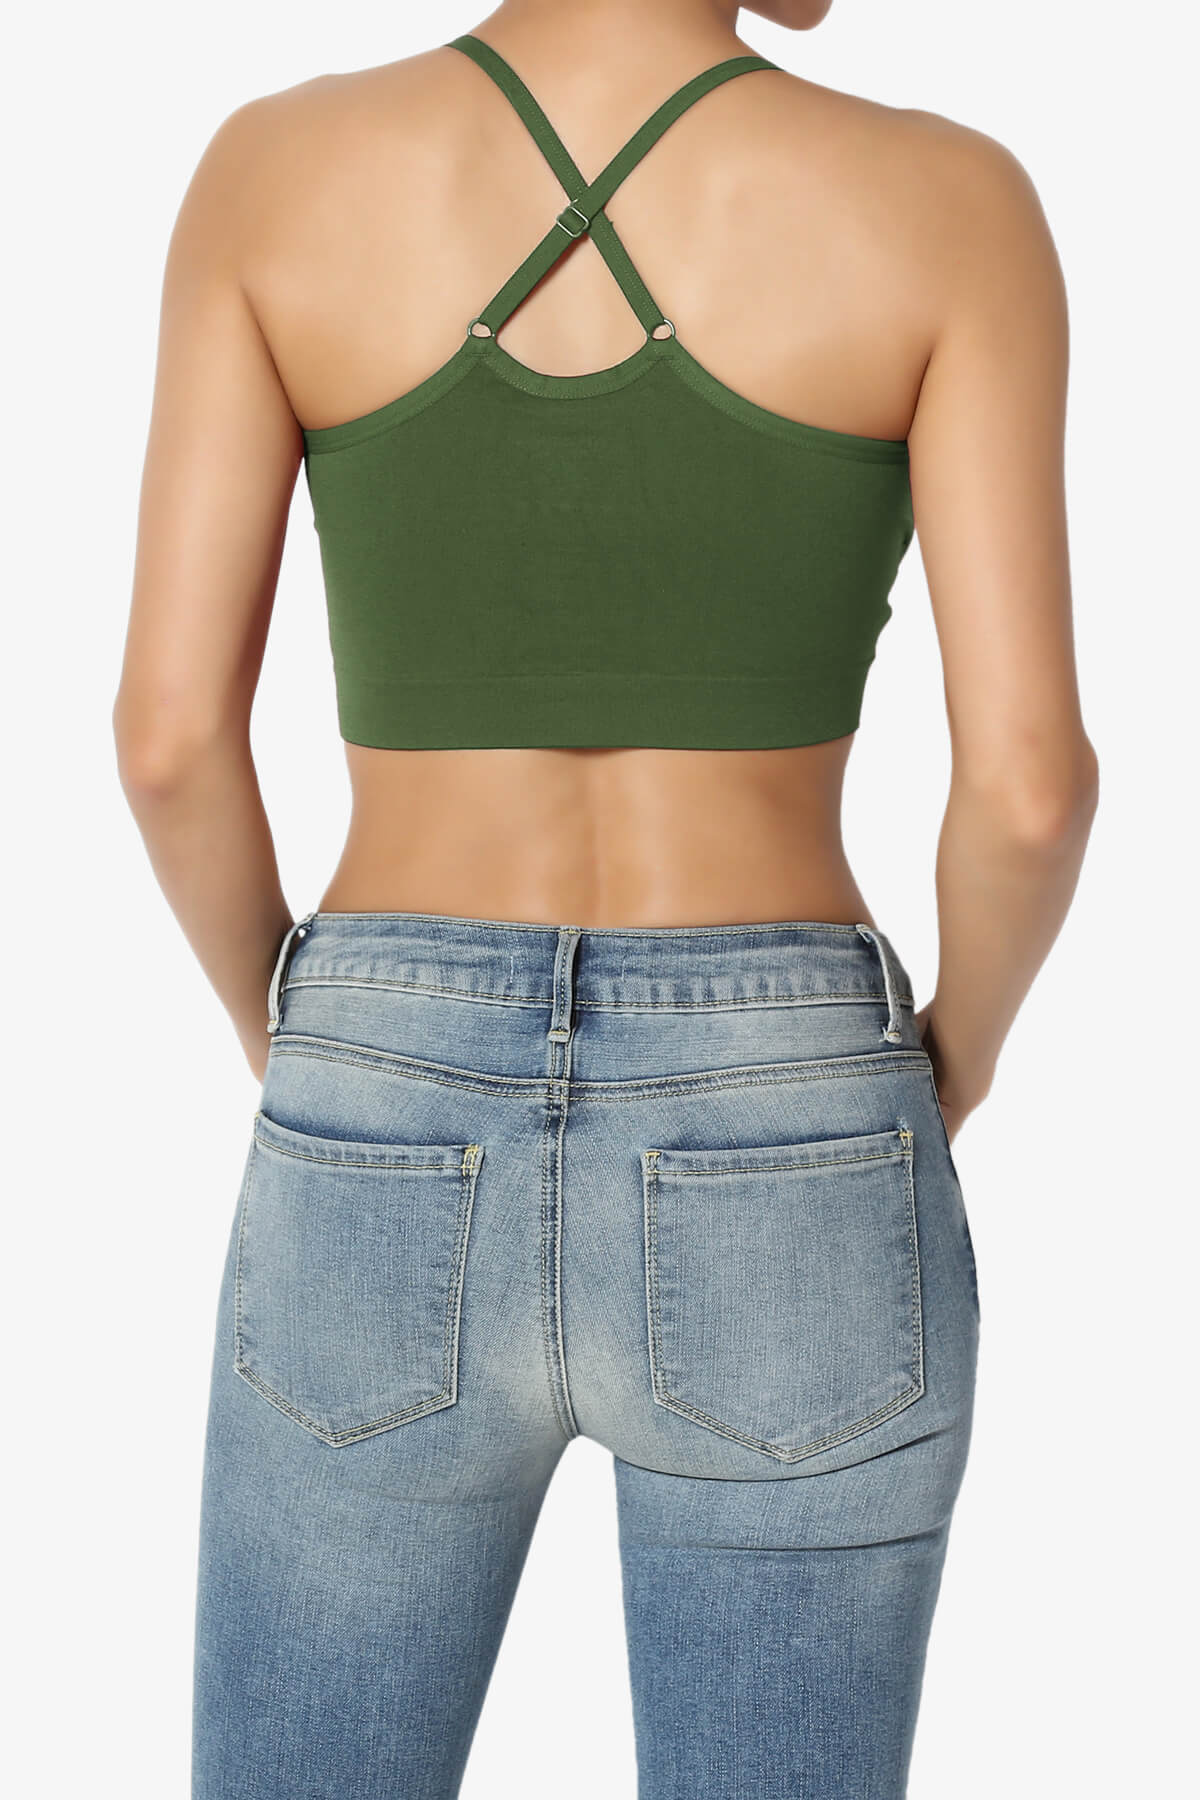 Load image into Gallery viewer, Dassie Padded Cross Back Bra Top ARMY GREEN_2
